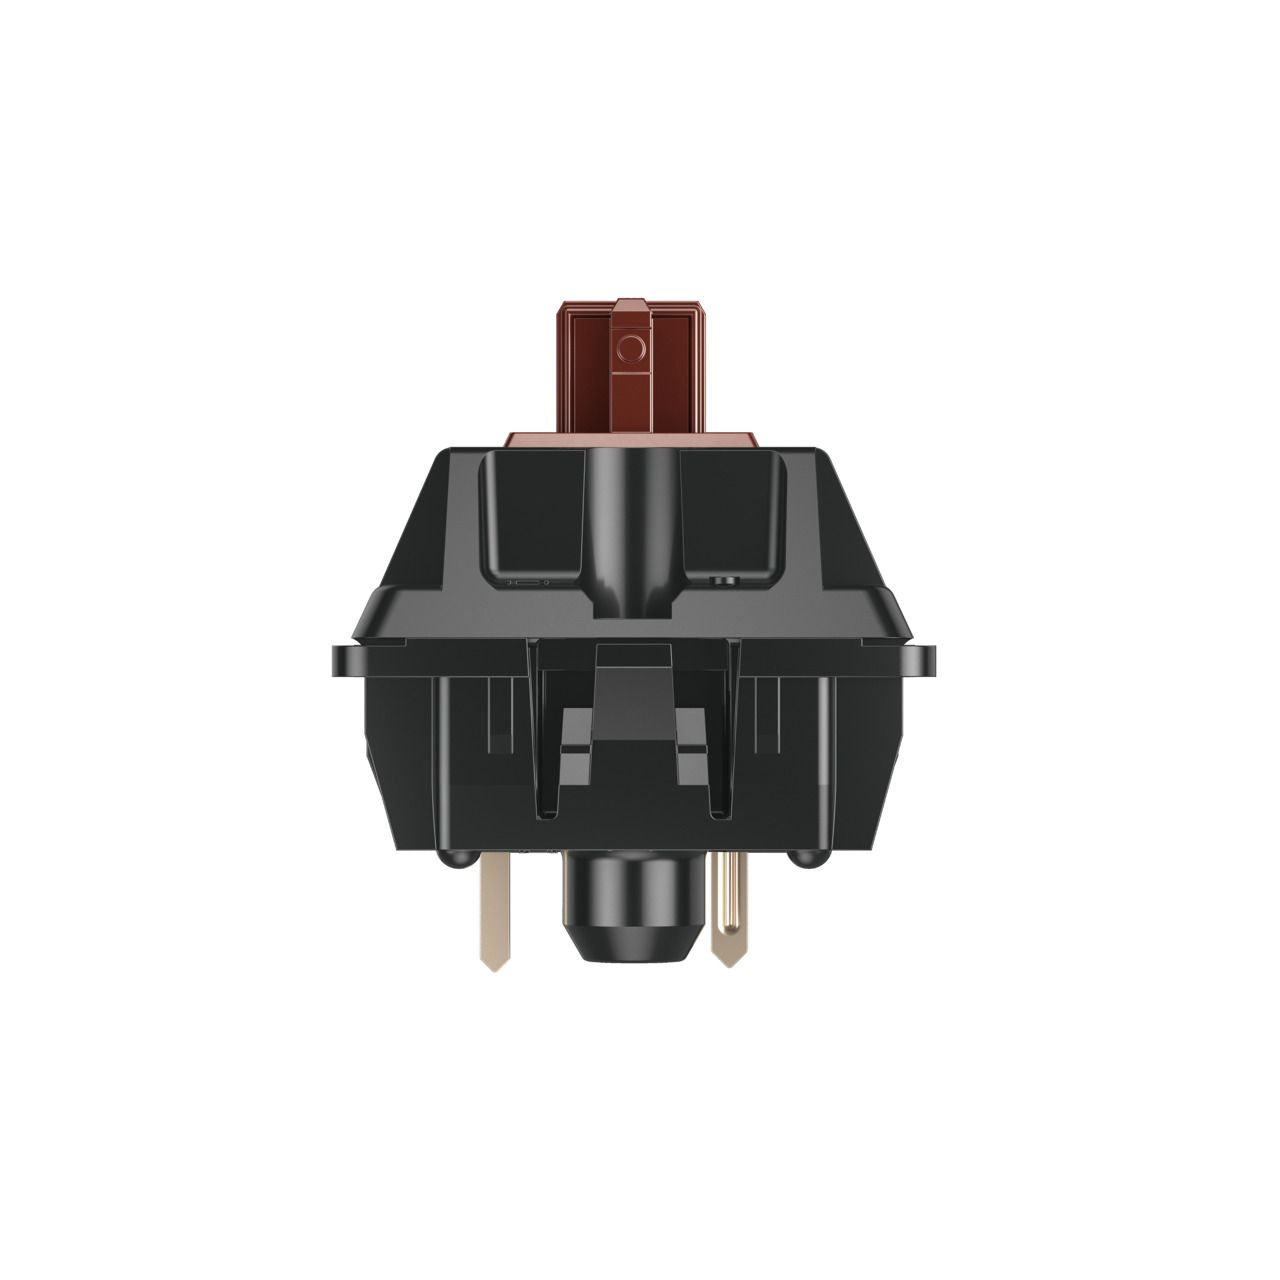 Cherry MX2A Brown Linear Switches - KeebsForAll